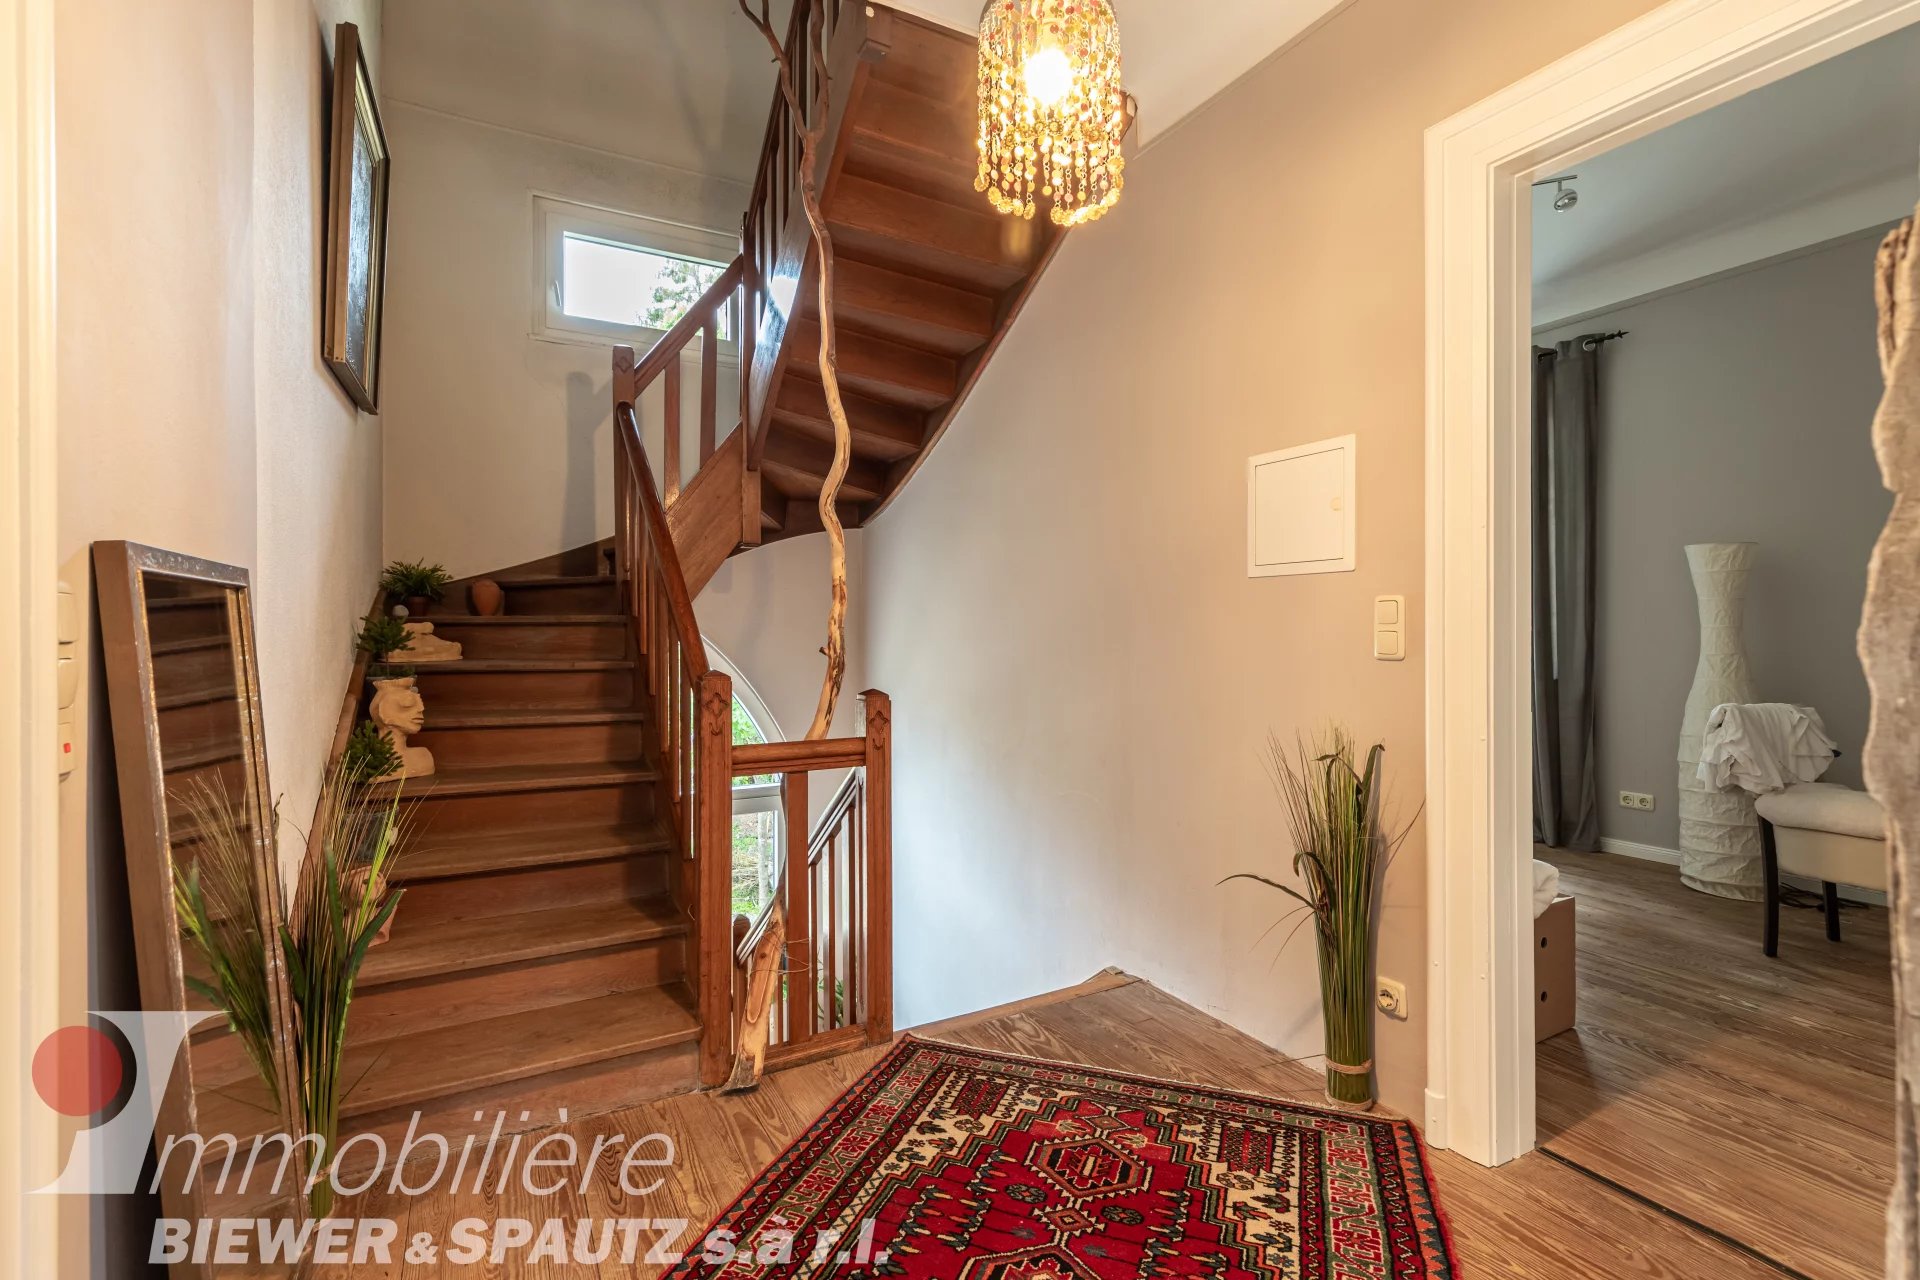 Unique Detached House (Former Rectory) with 3 Bedrooms in Berbourg